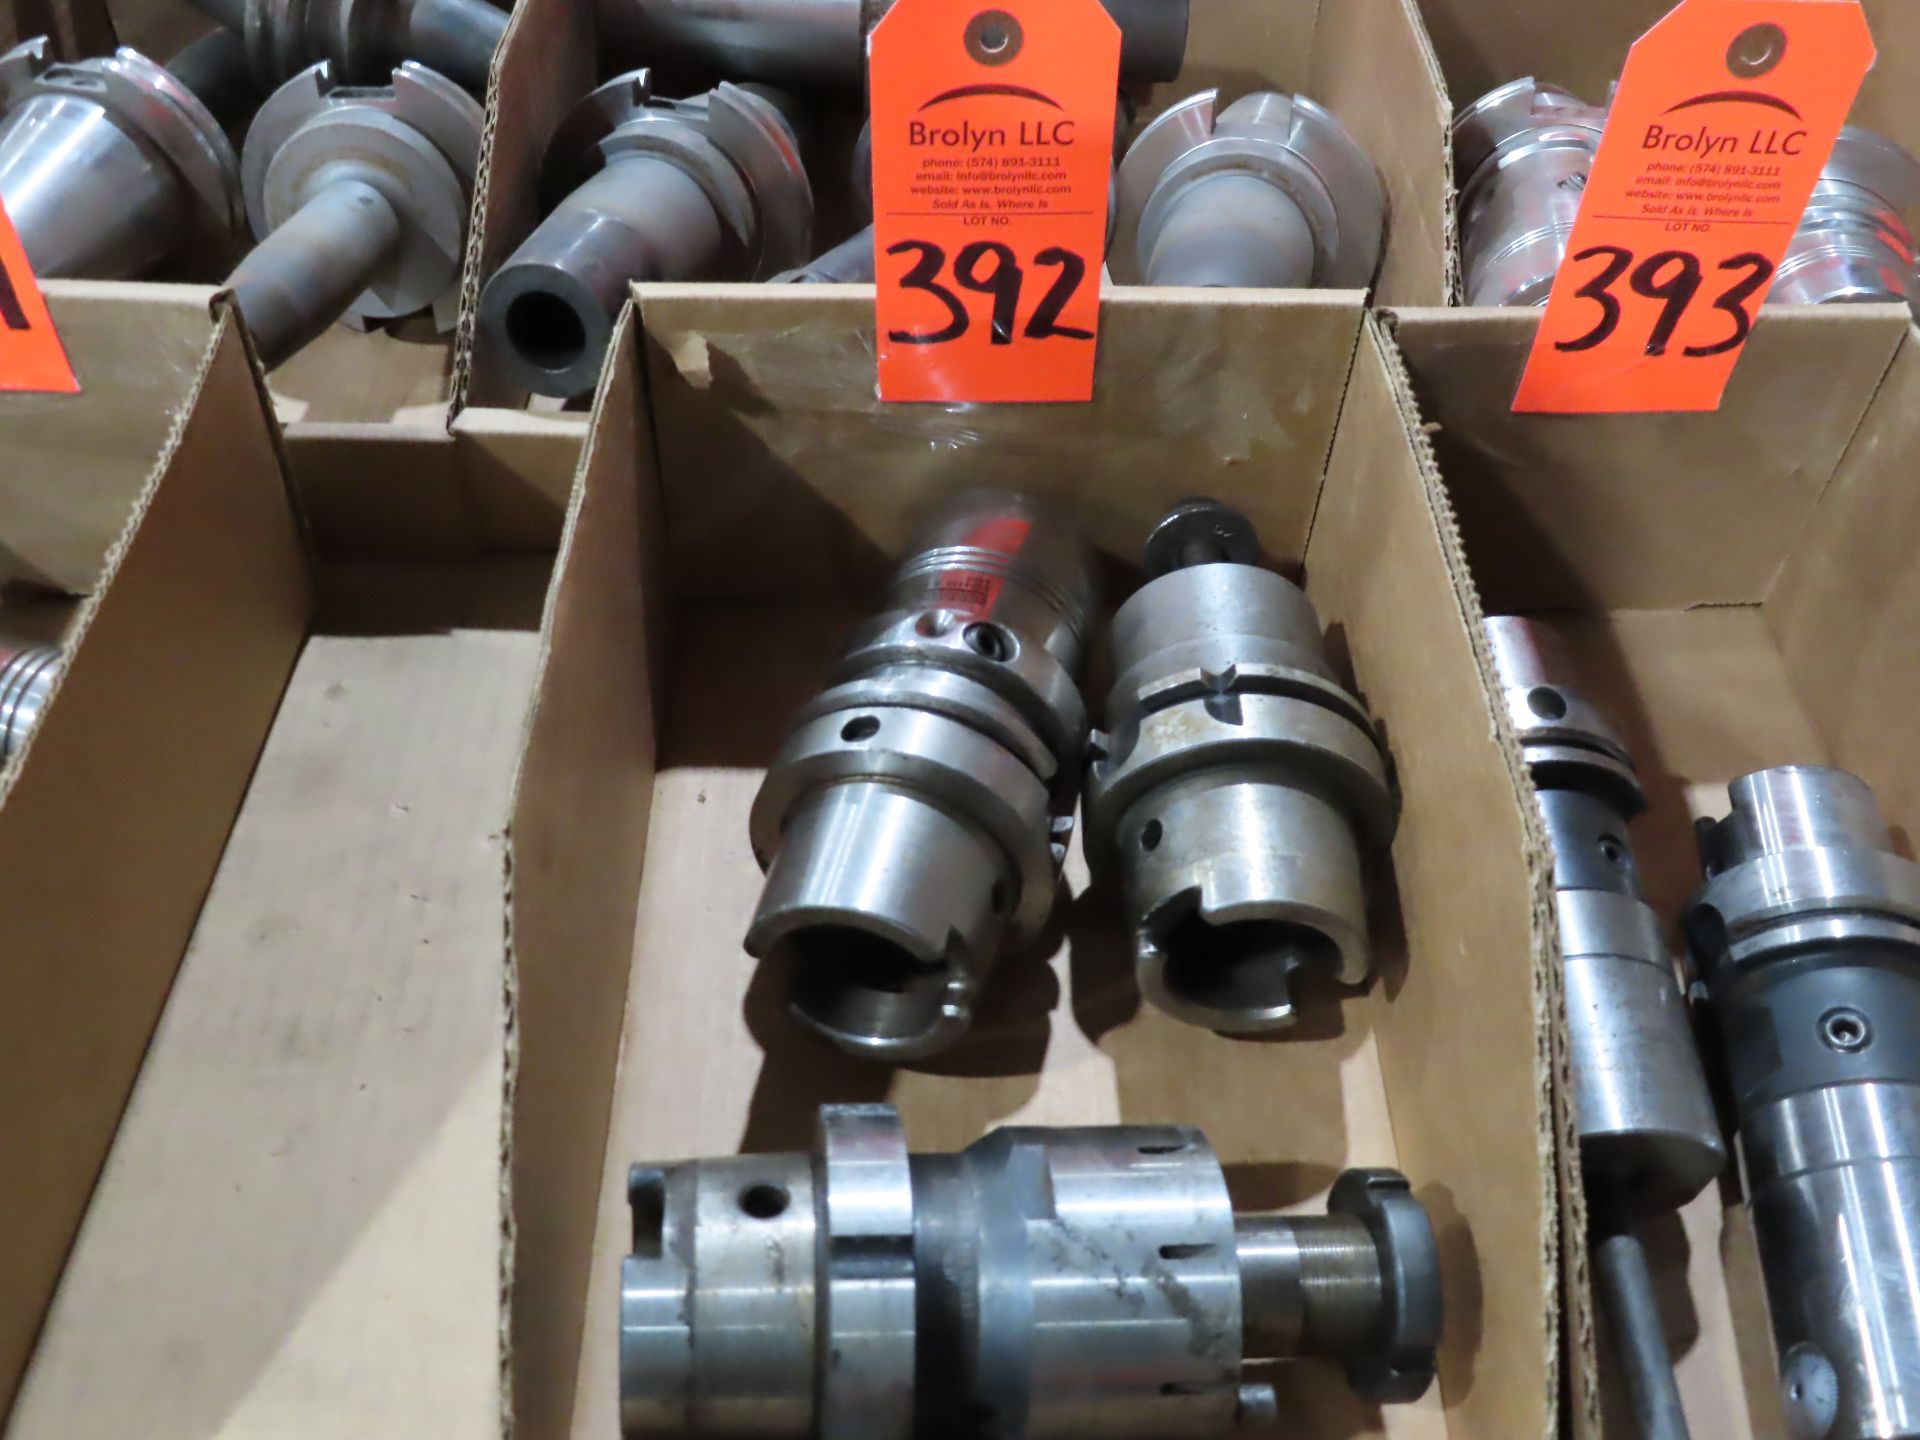 Assorted HSK tooling. This lot can be picked up onsite with no loading fee. Should you need shipping